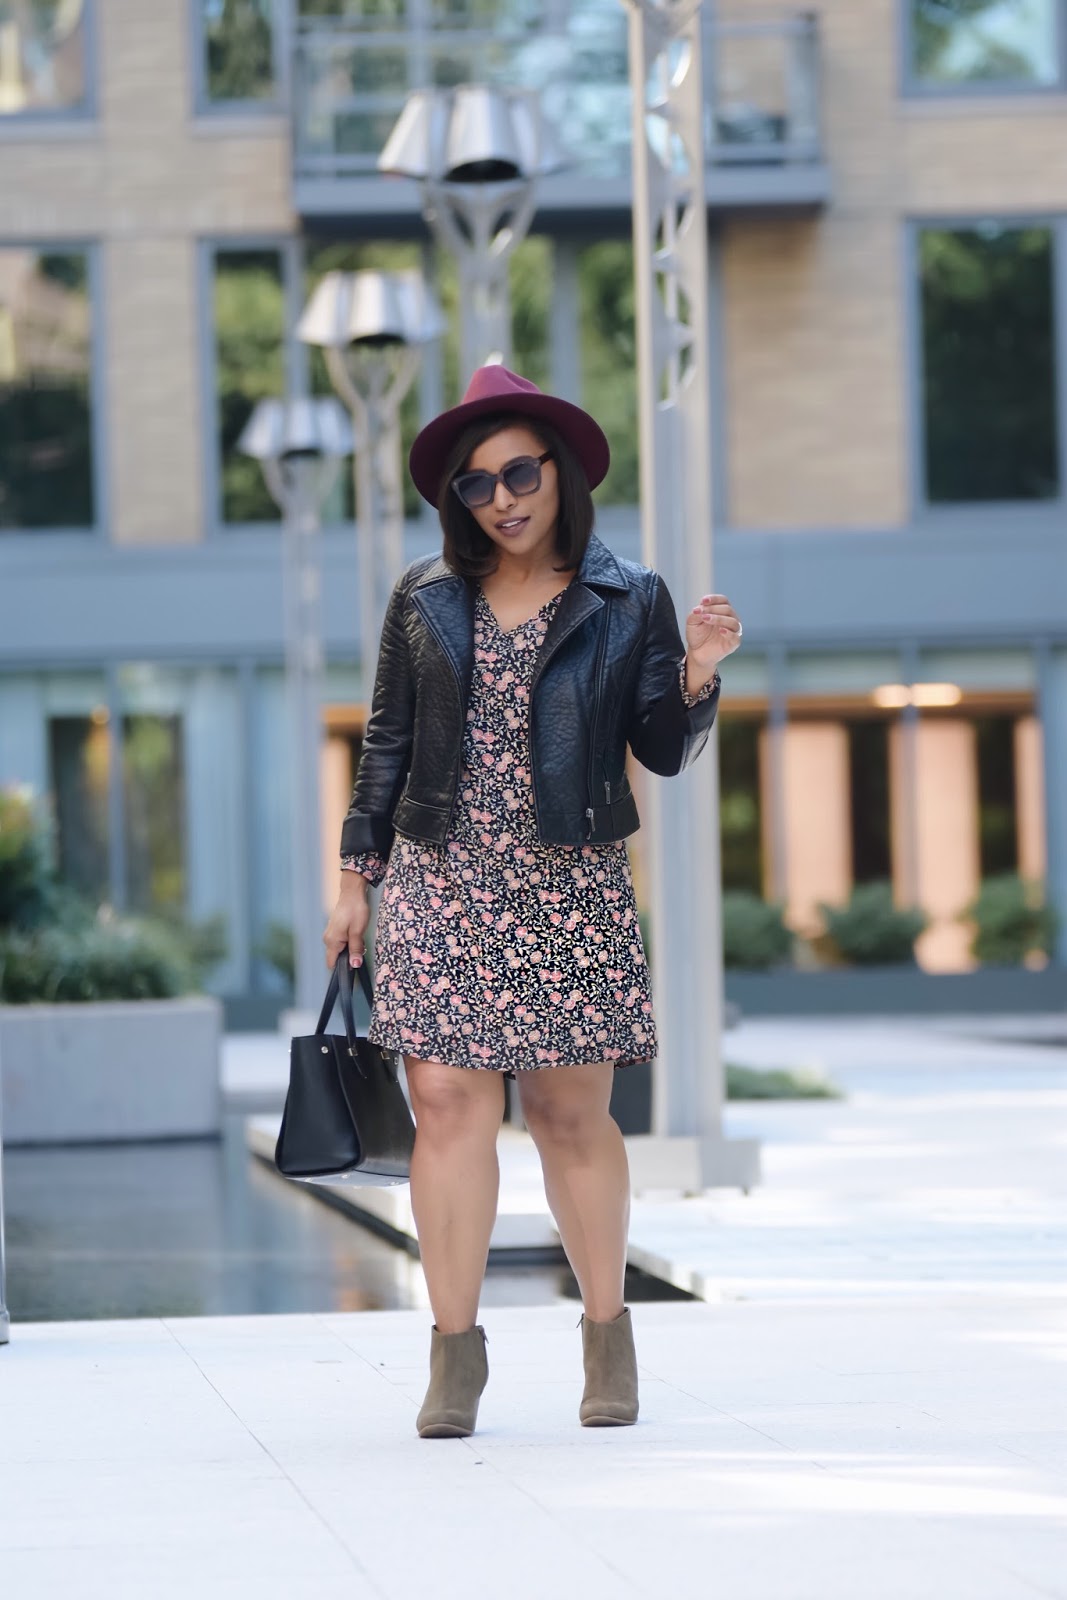 boho fall looks, oldnavy style, old navy dresses, moto jacket, fall fashion, fall outfit ideas, floral fall dress